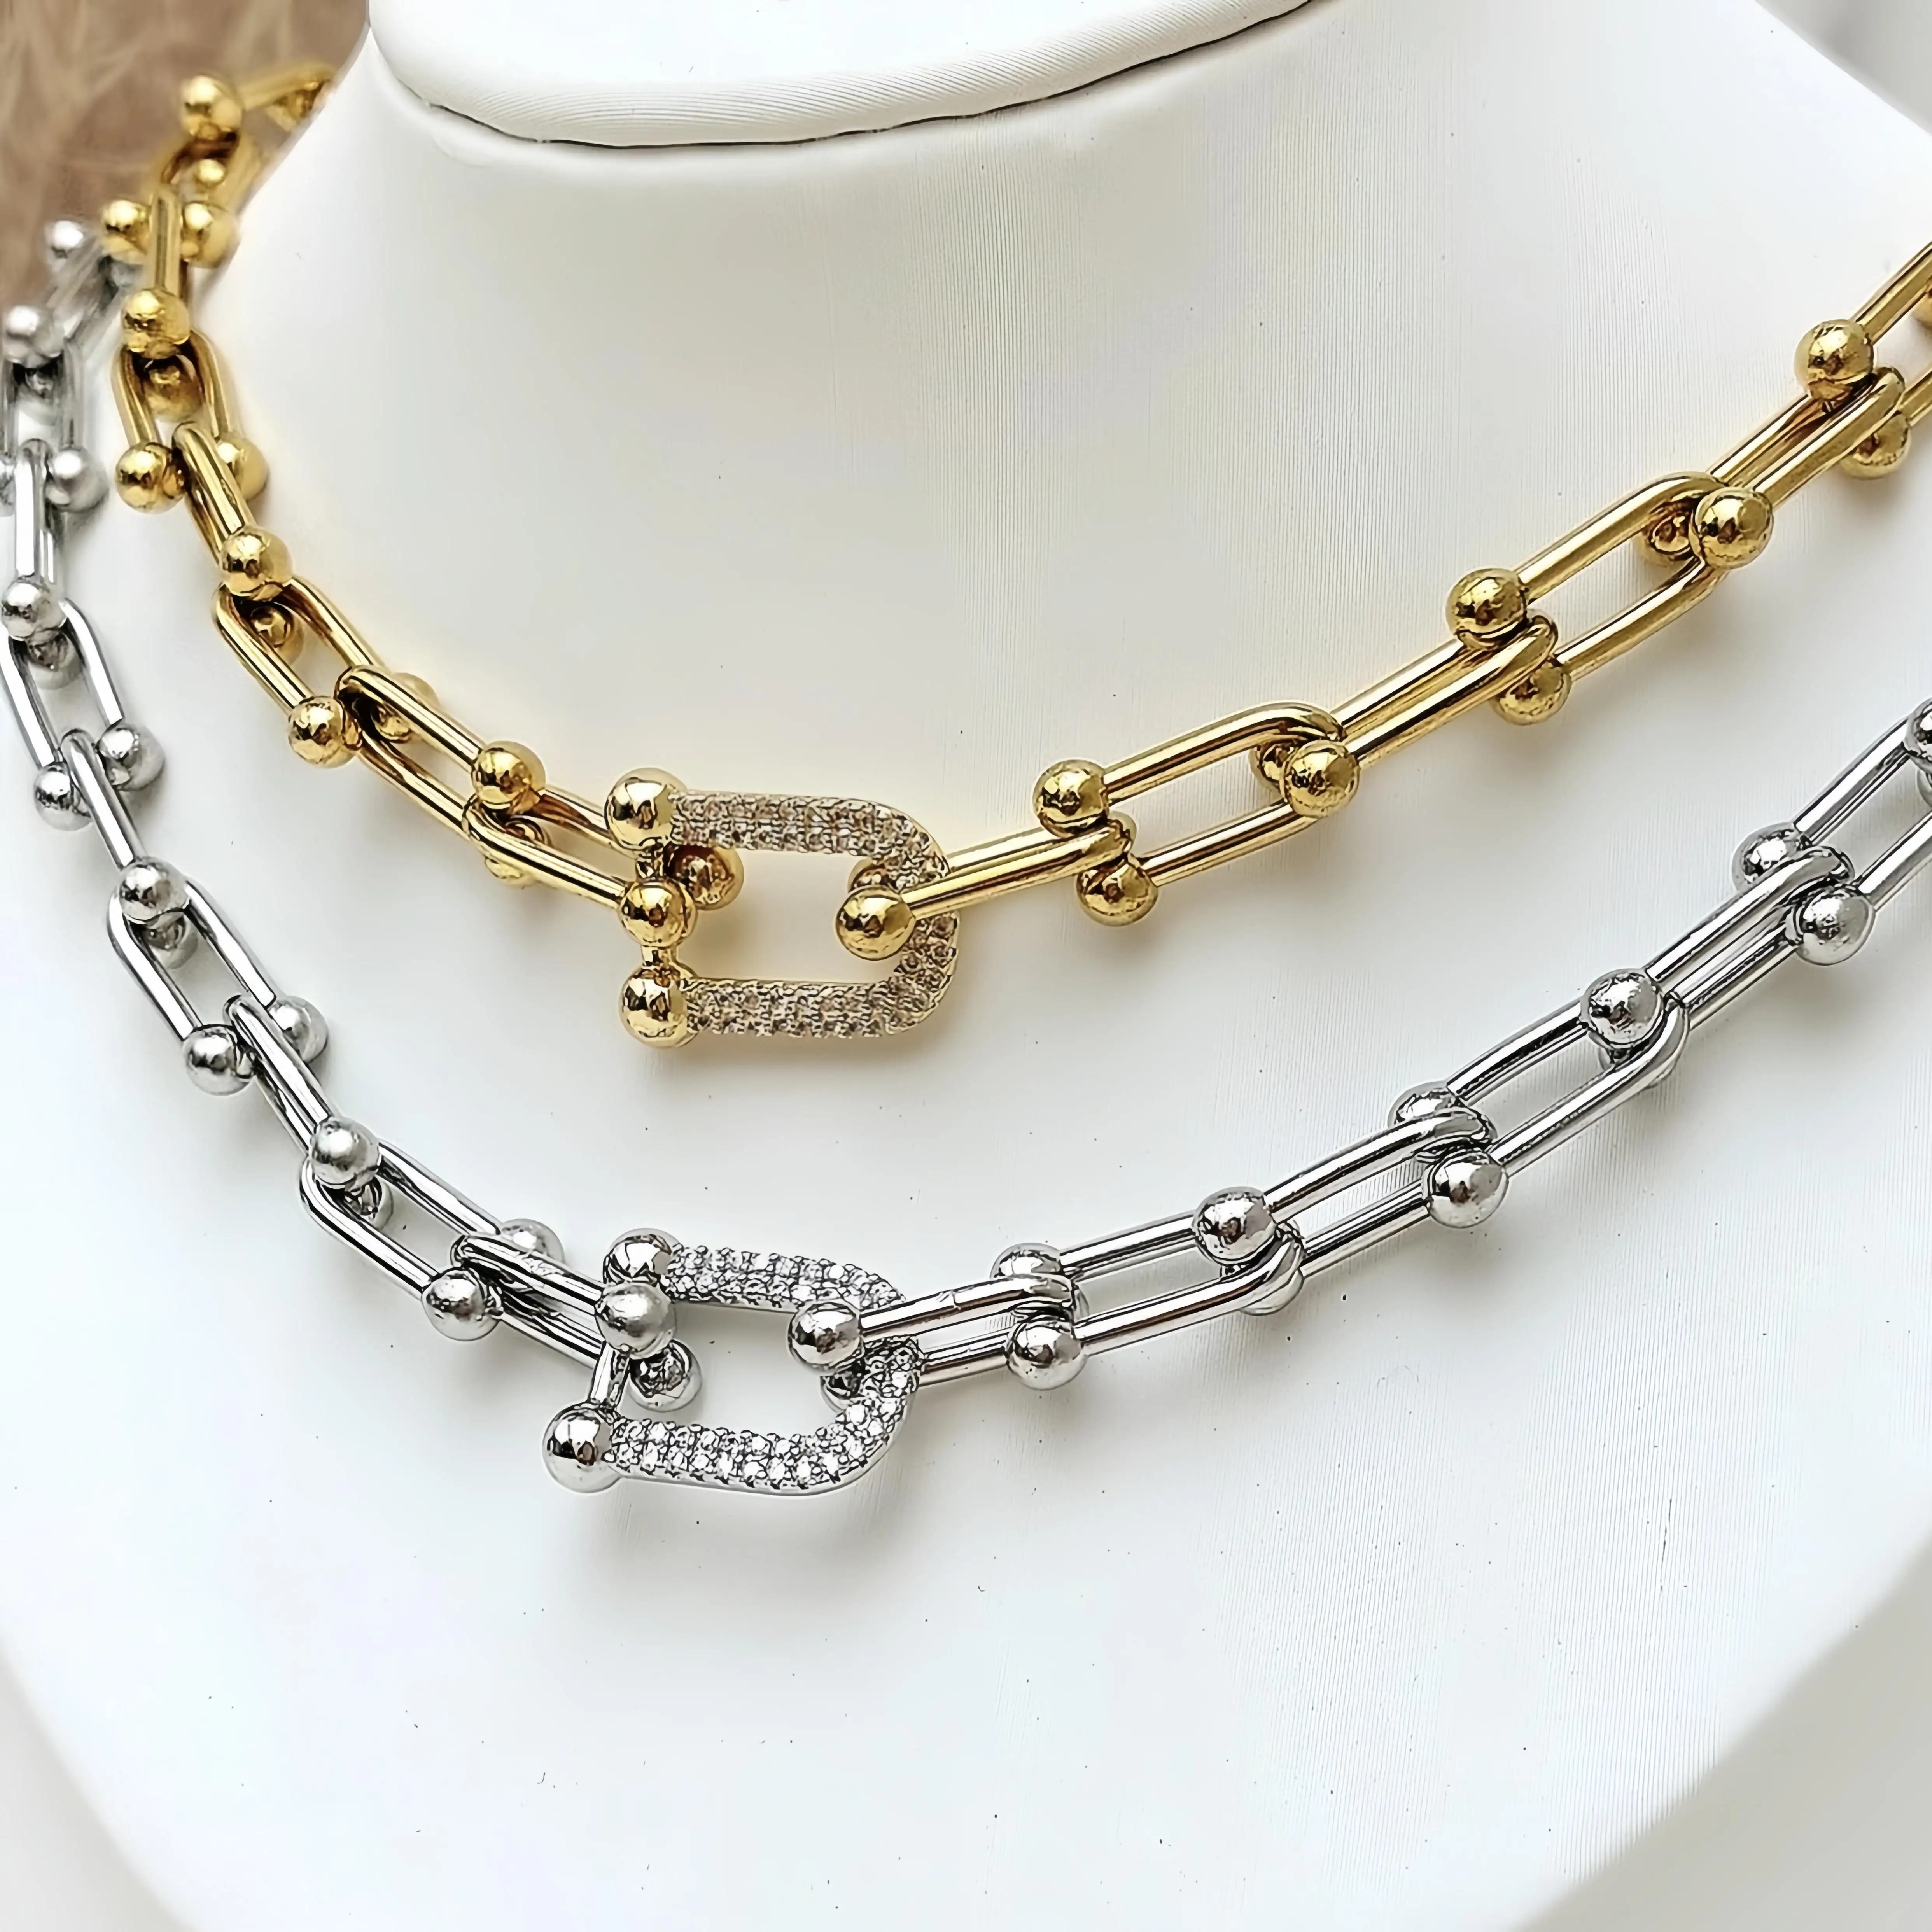 Hip hop cuban Lock zircon gem Charm Choker Necklace china 18k gold 925 silver plated link chain Jewelry necklace snake chain